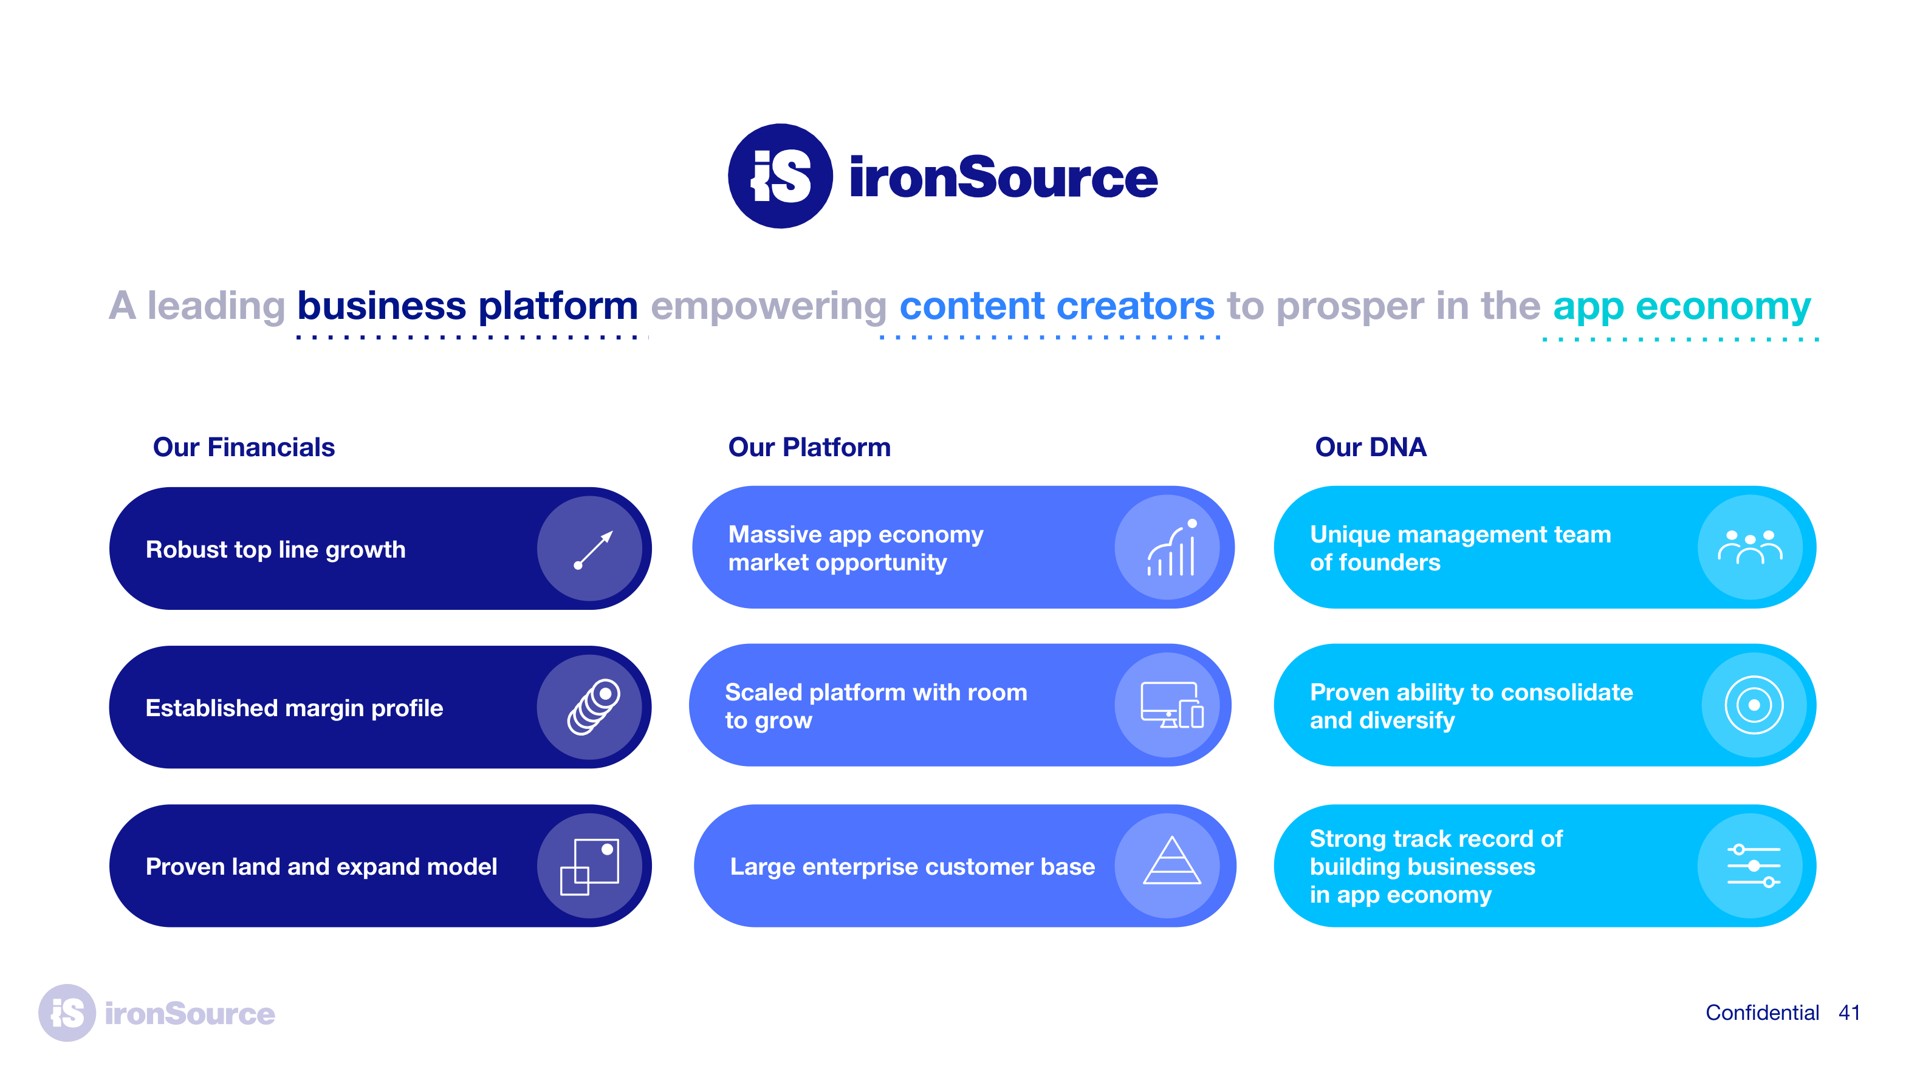 a leading business platform empowering content creators to prosper in the economy | ironSource